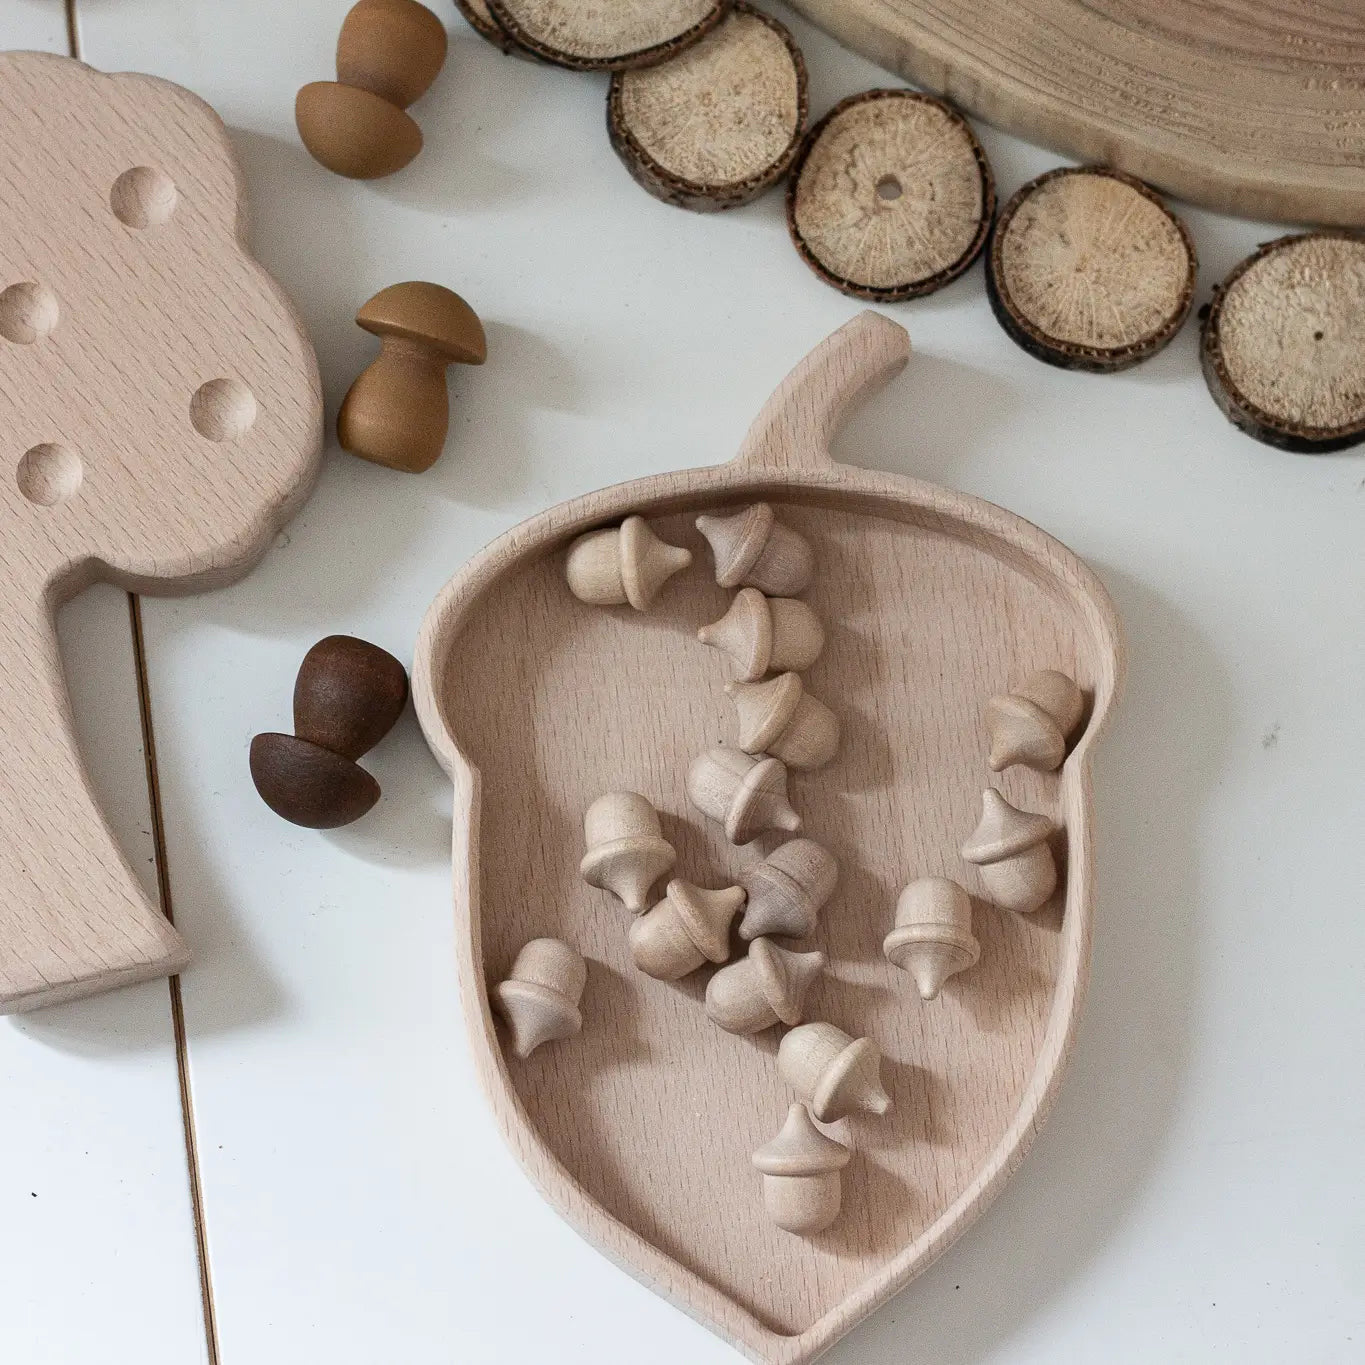 Wooden Acorns with or without a Drawstring Cotton Bag